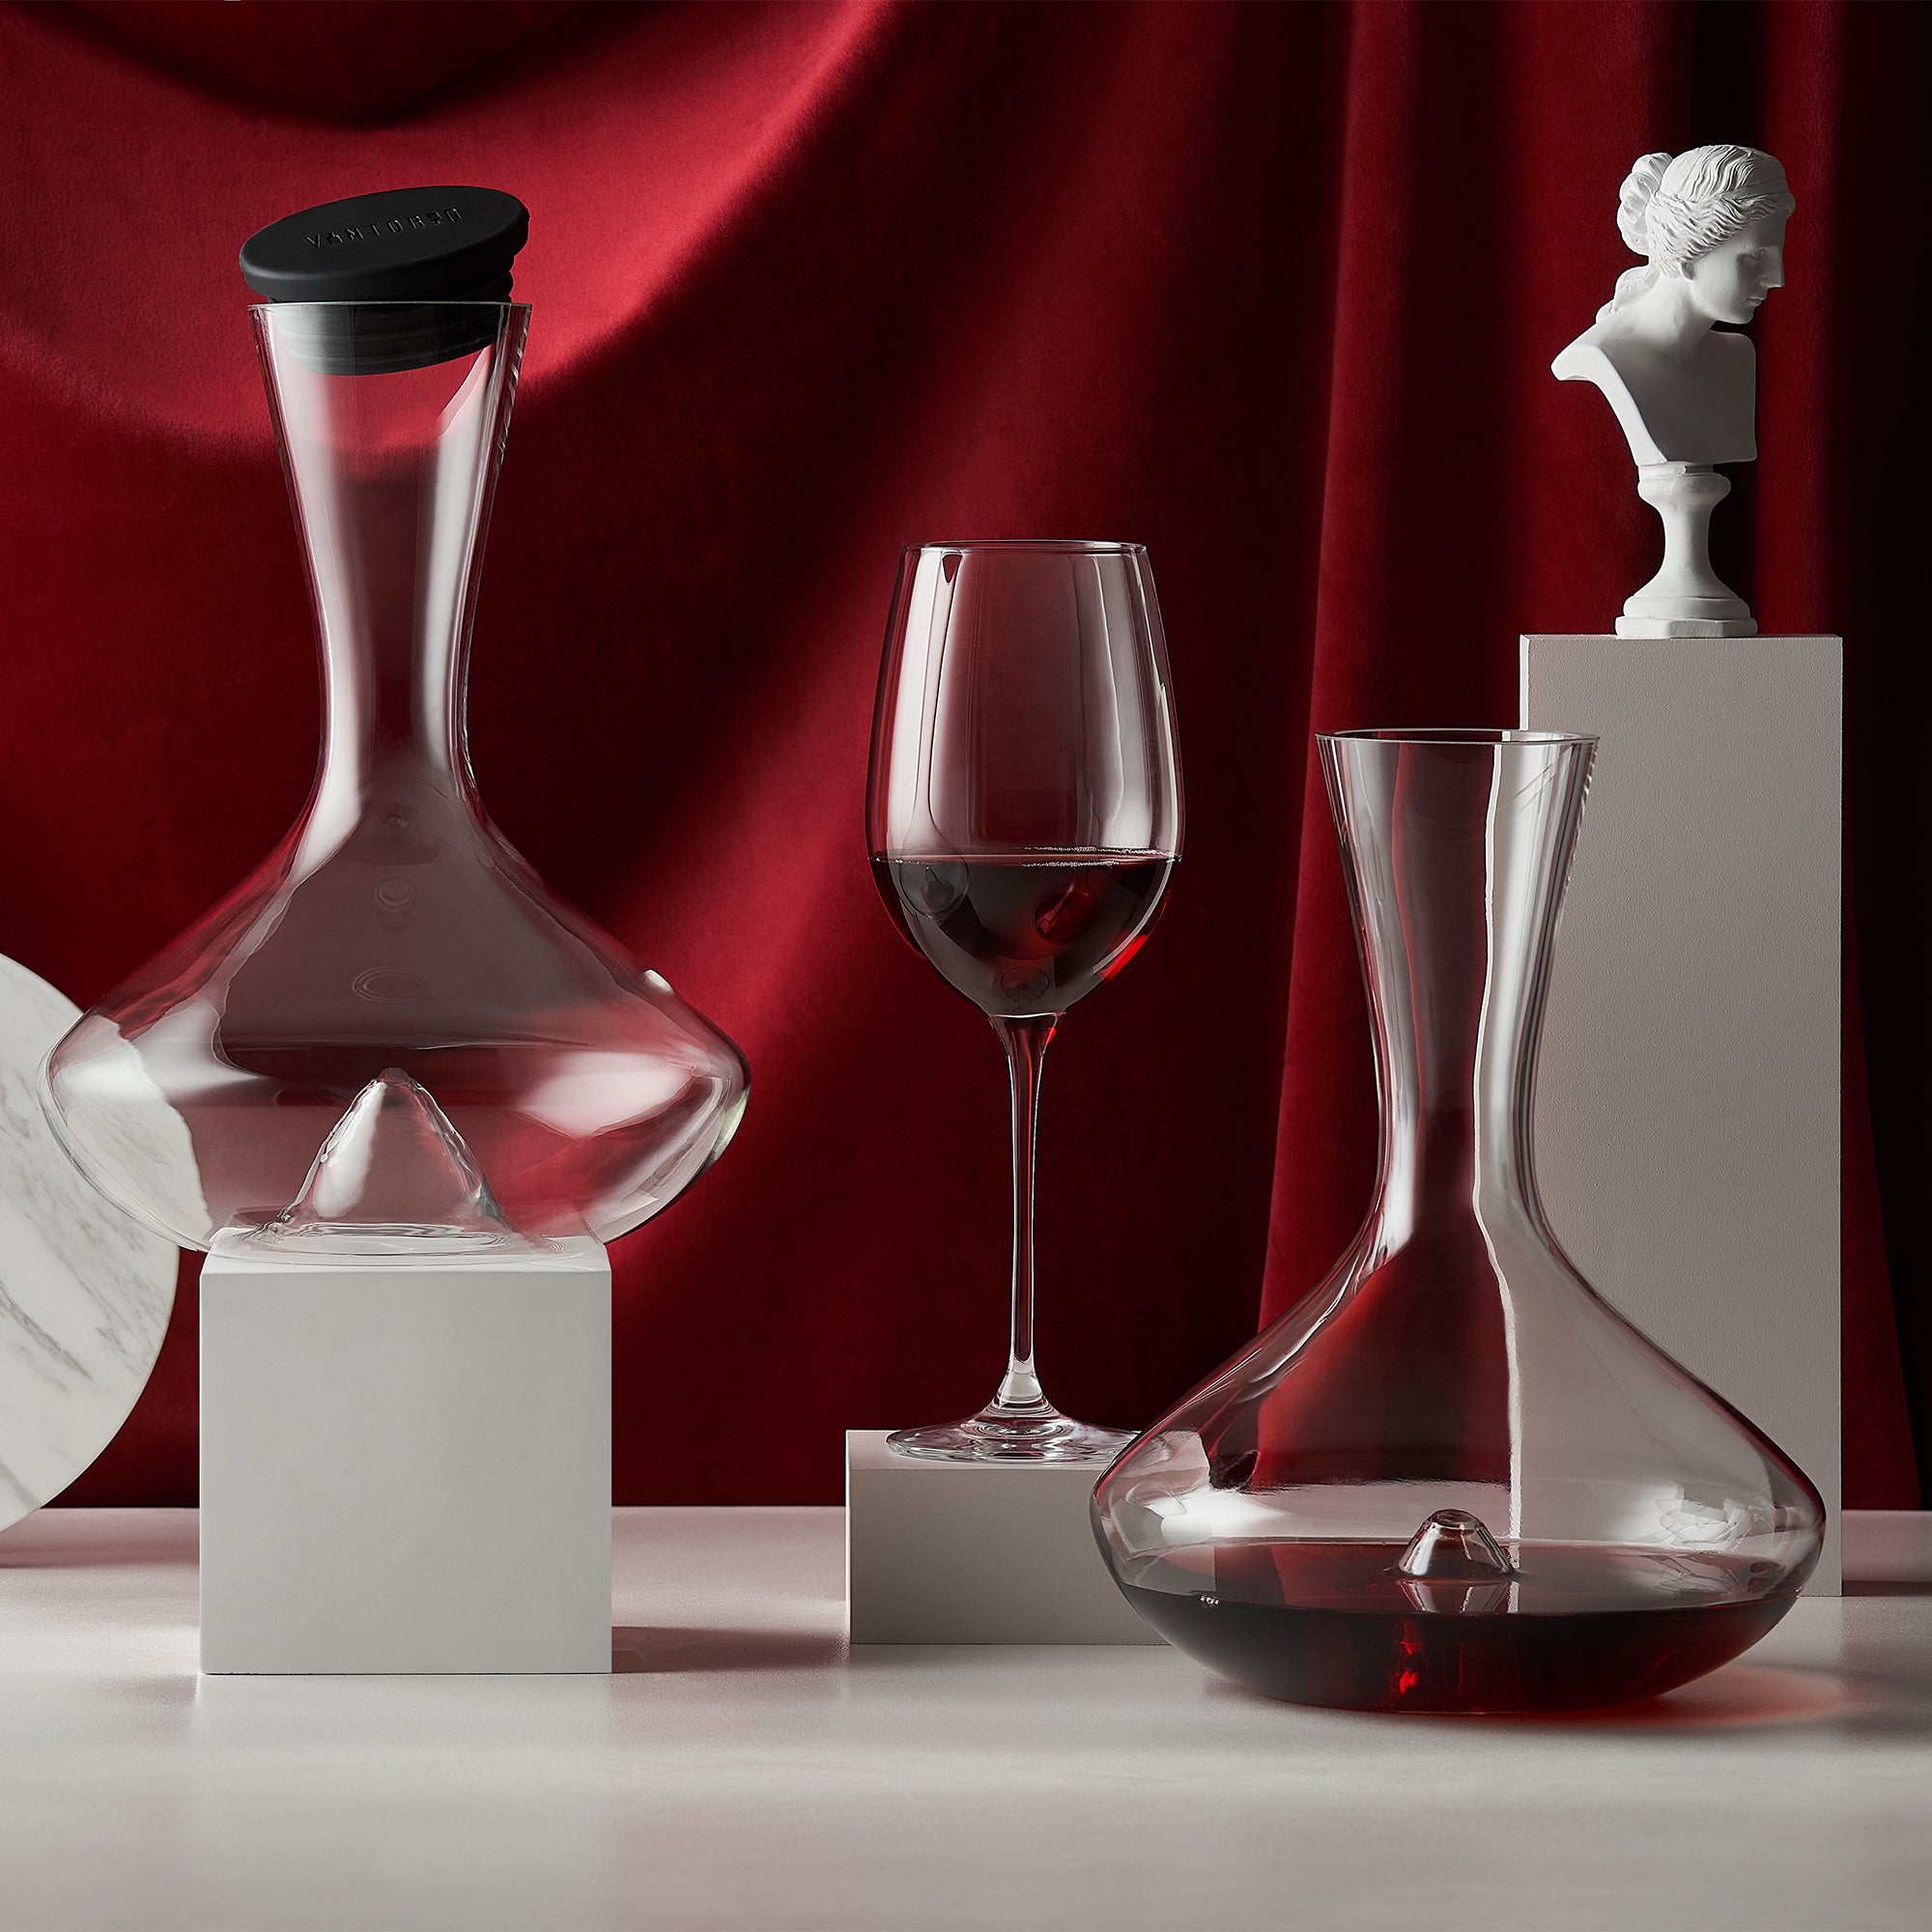 LV VIP decanter set red wine Chanel style, 傢俬＆家居, 家居裝飾